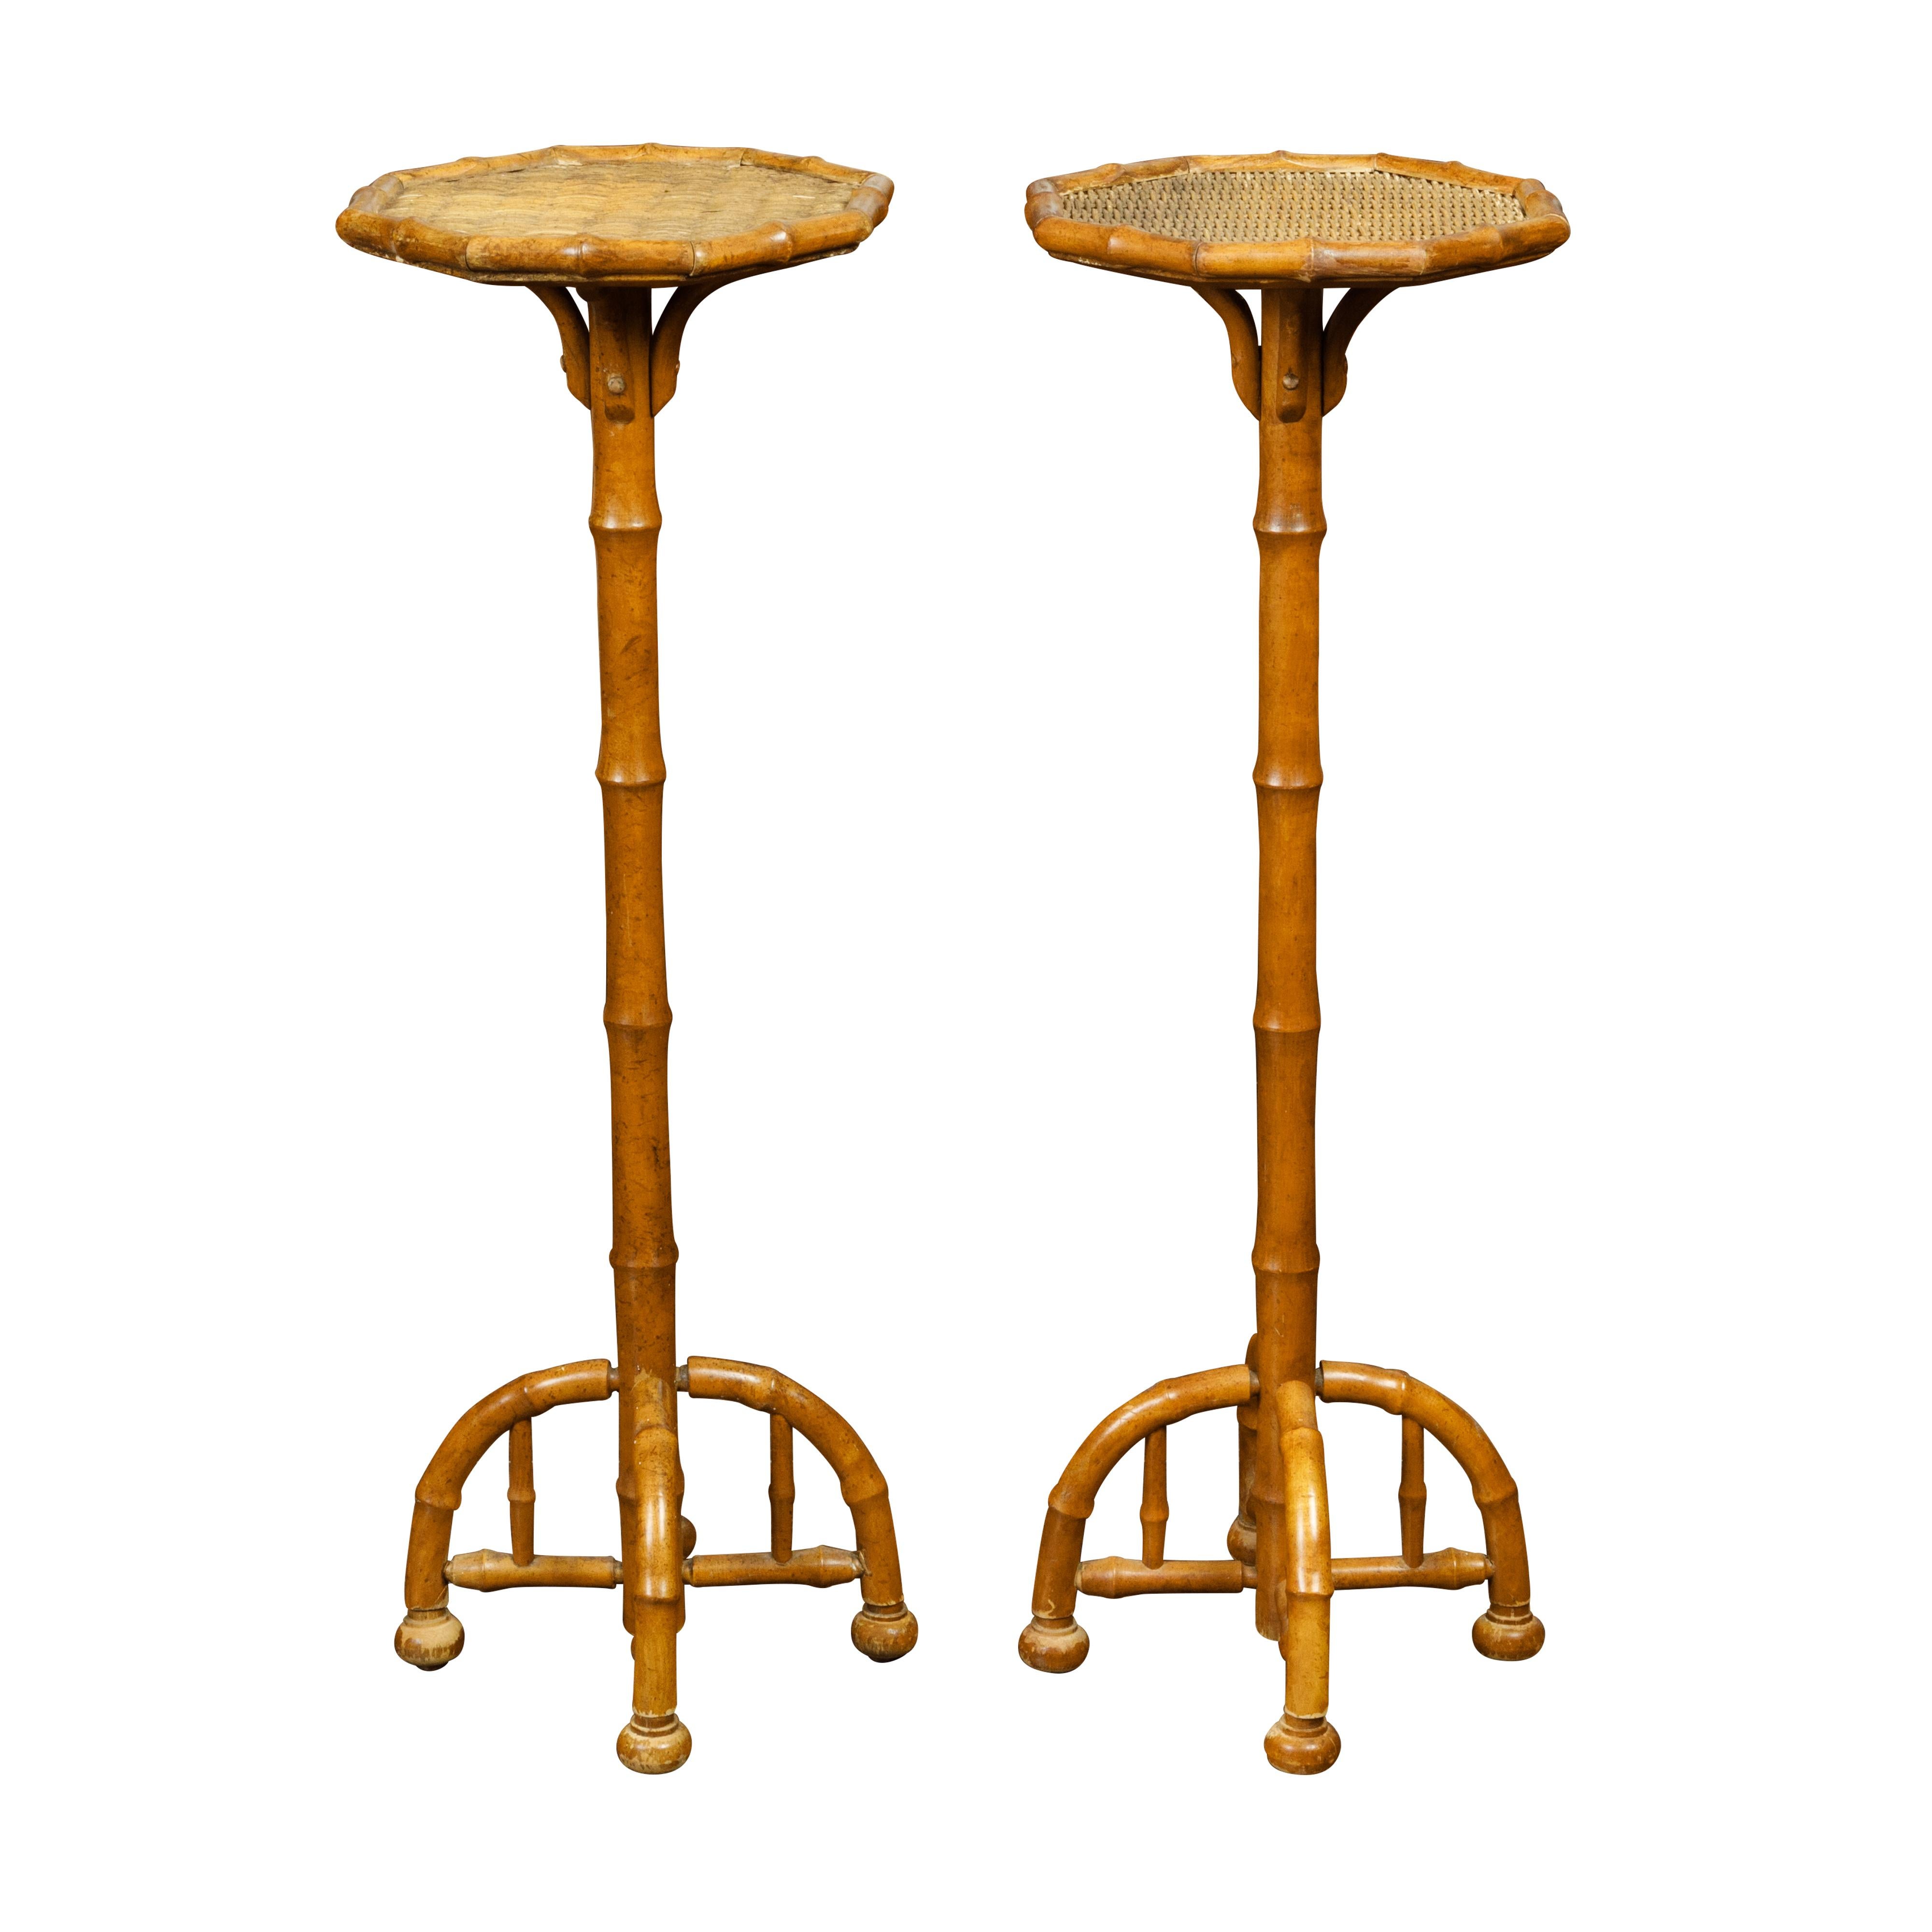 Pair of 1920s Faux Bamboo Stands with Octagonal Rattan Tops and Quadripod Bases